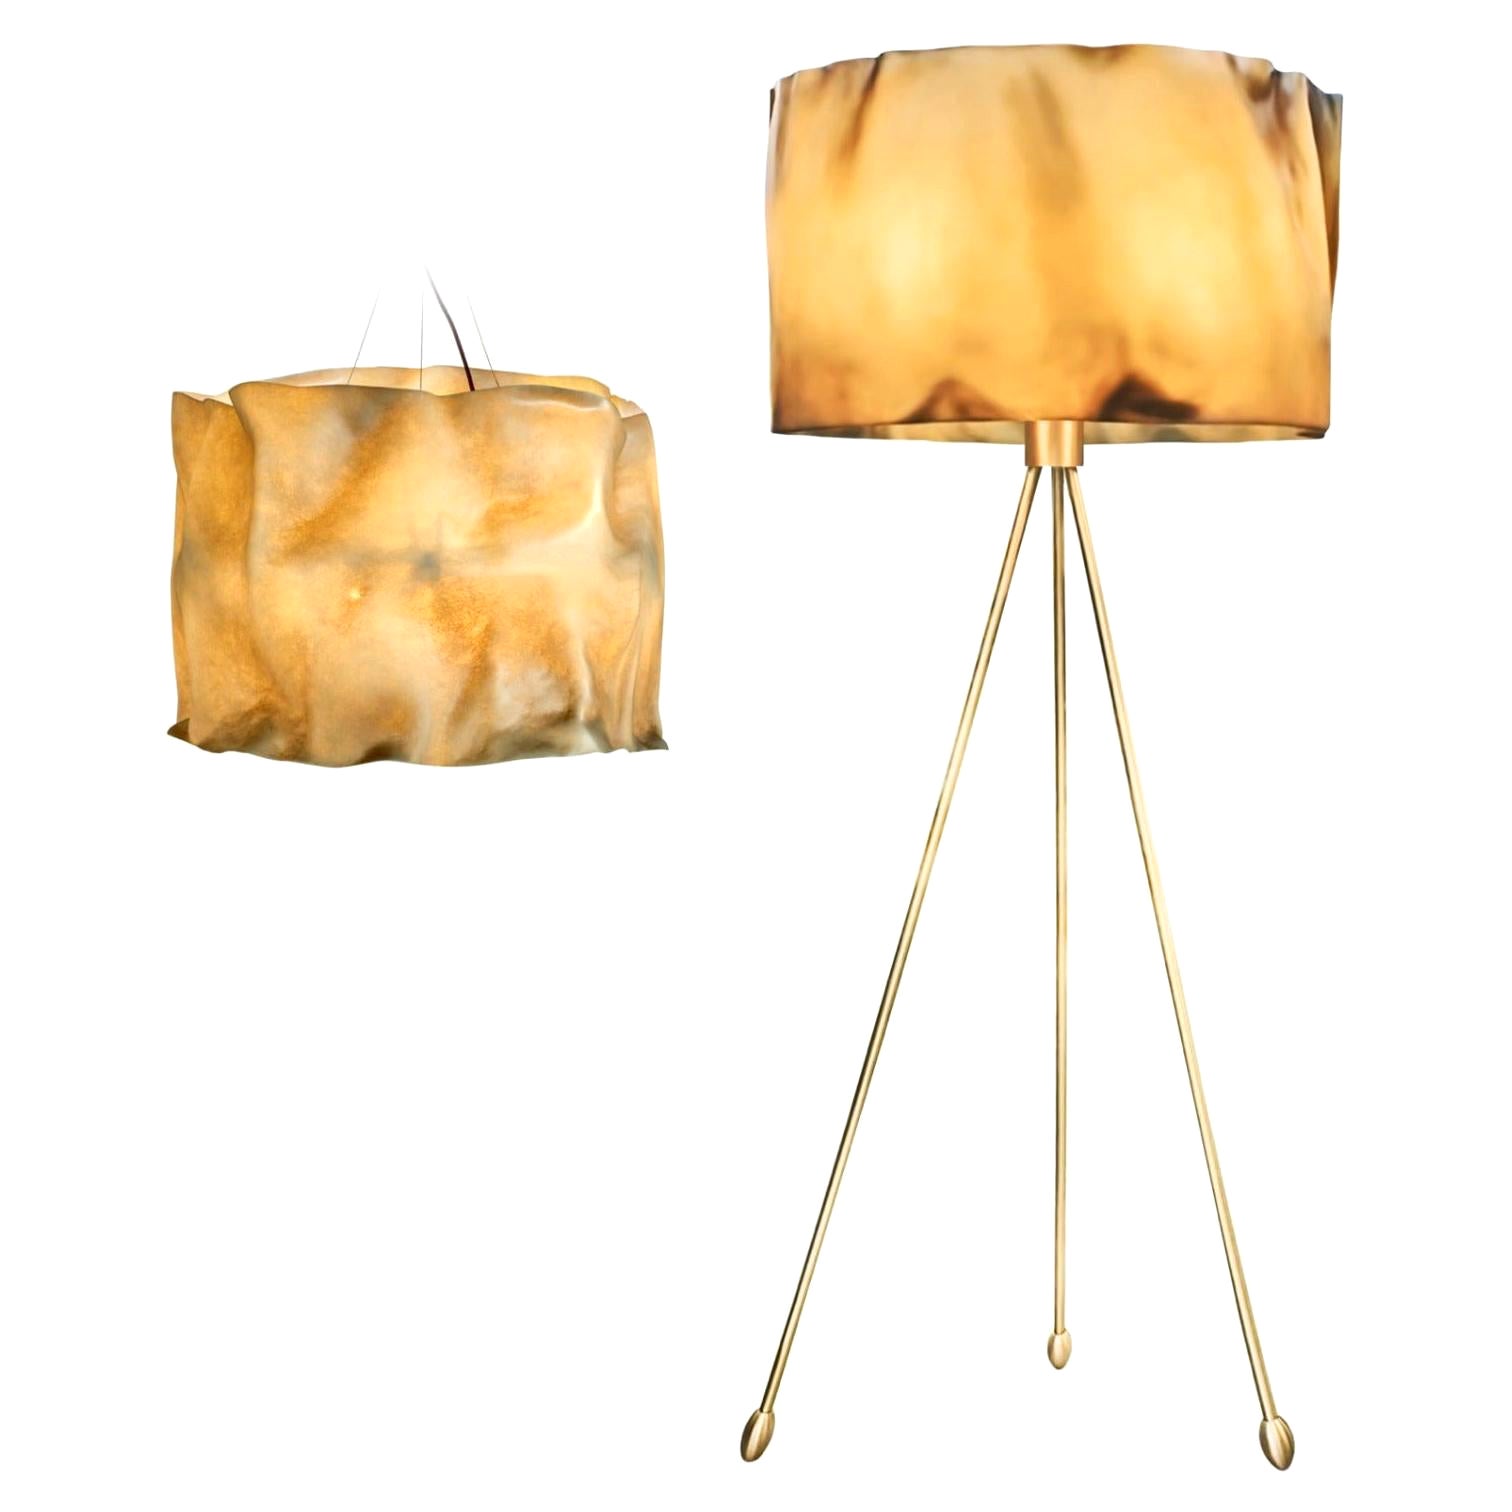 New Pair of Floor Lamp and Suspension Lamp in Resin Finished in Aged Natural For Sale